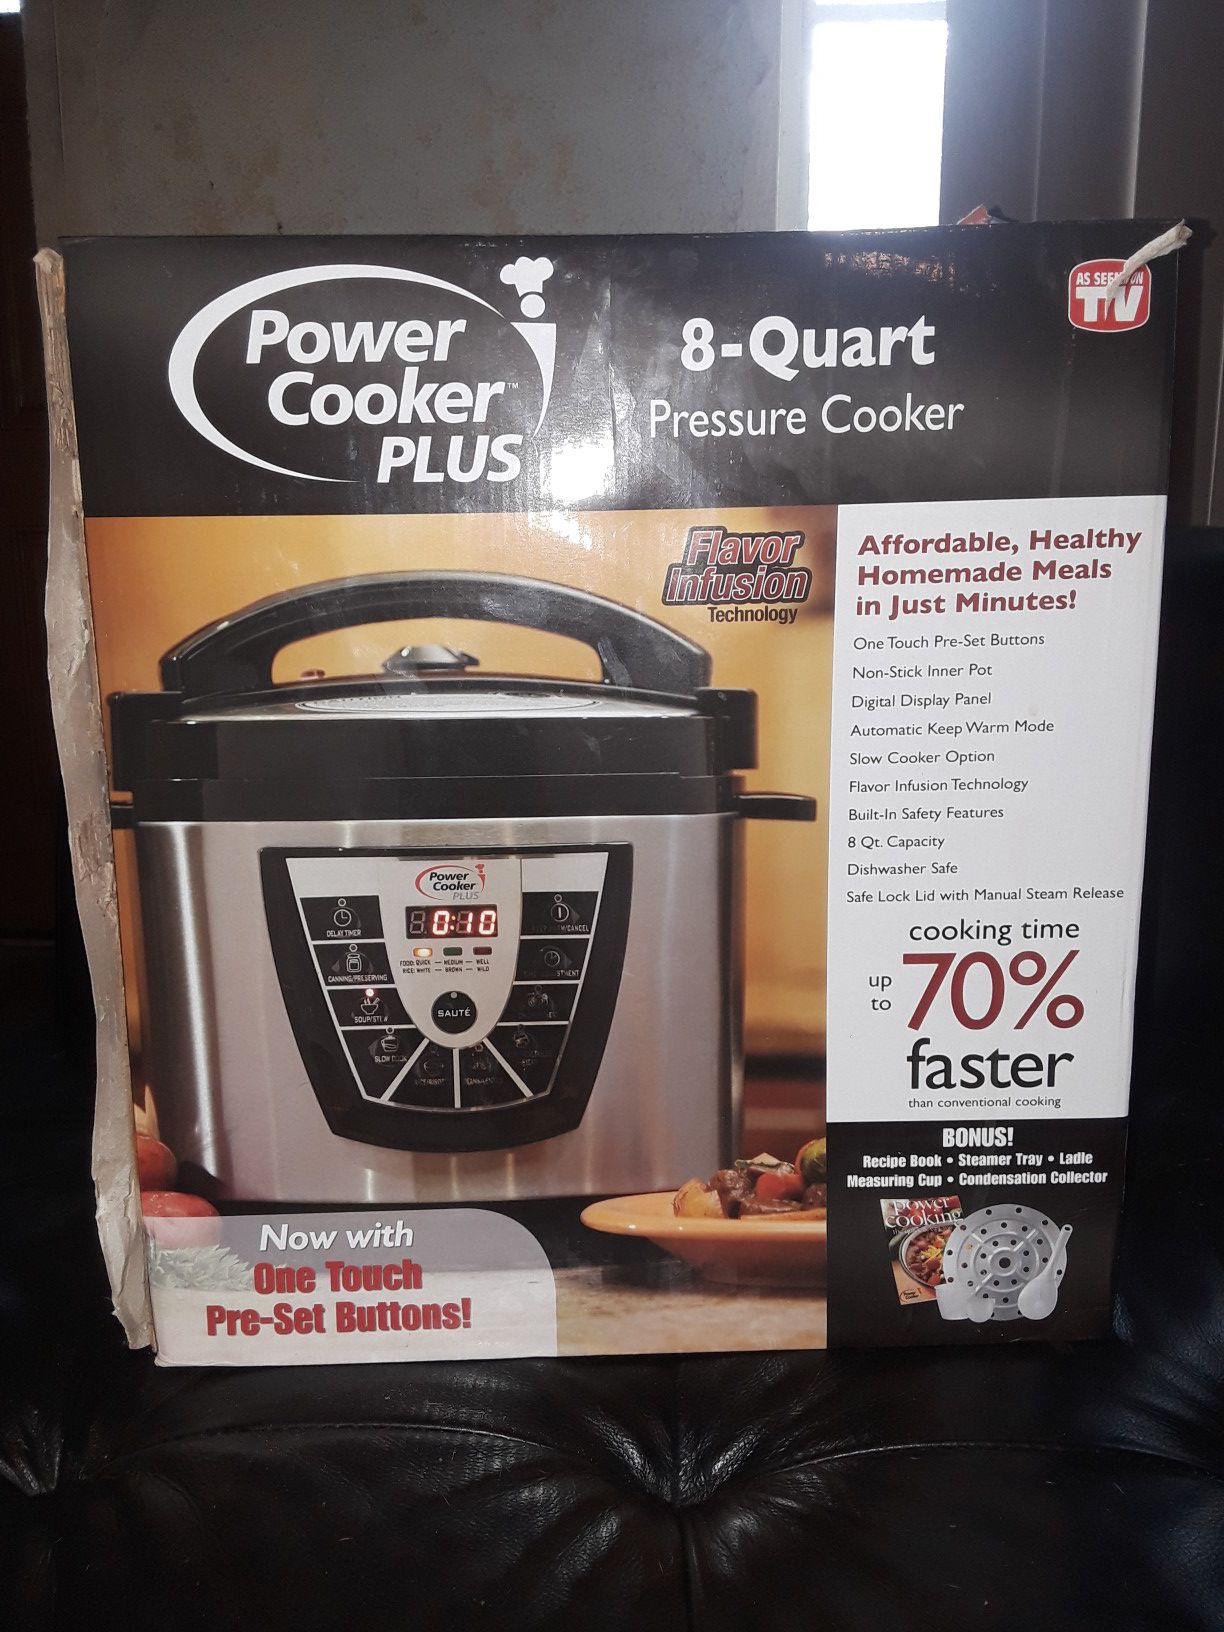 Power cooker plus for Sale in Jacksonville, FL - OfferUp